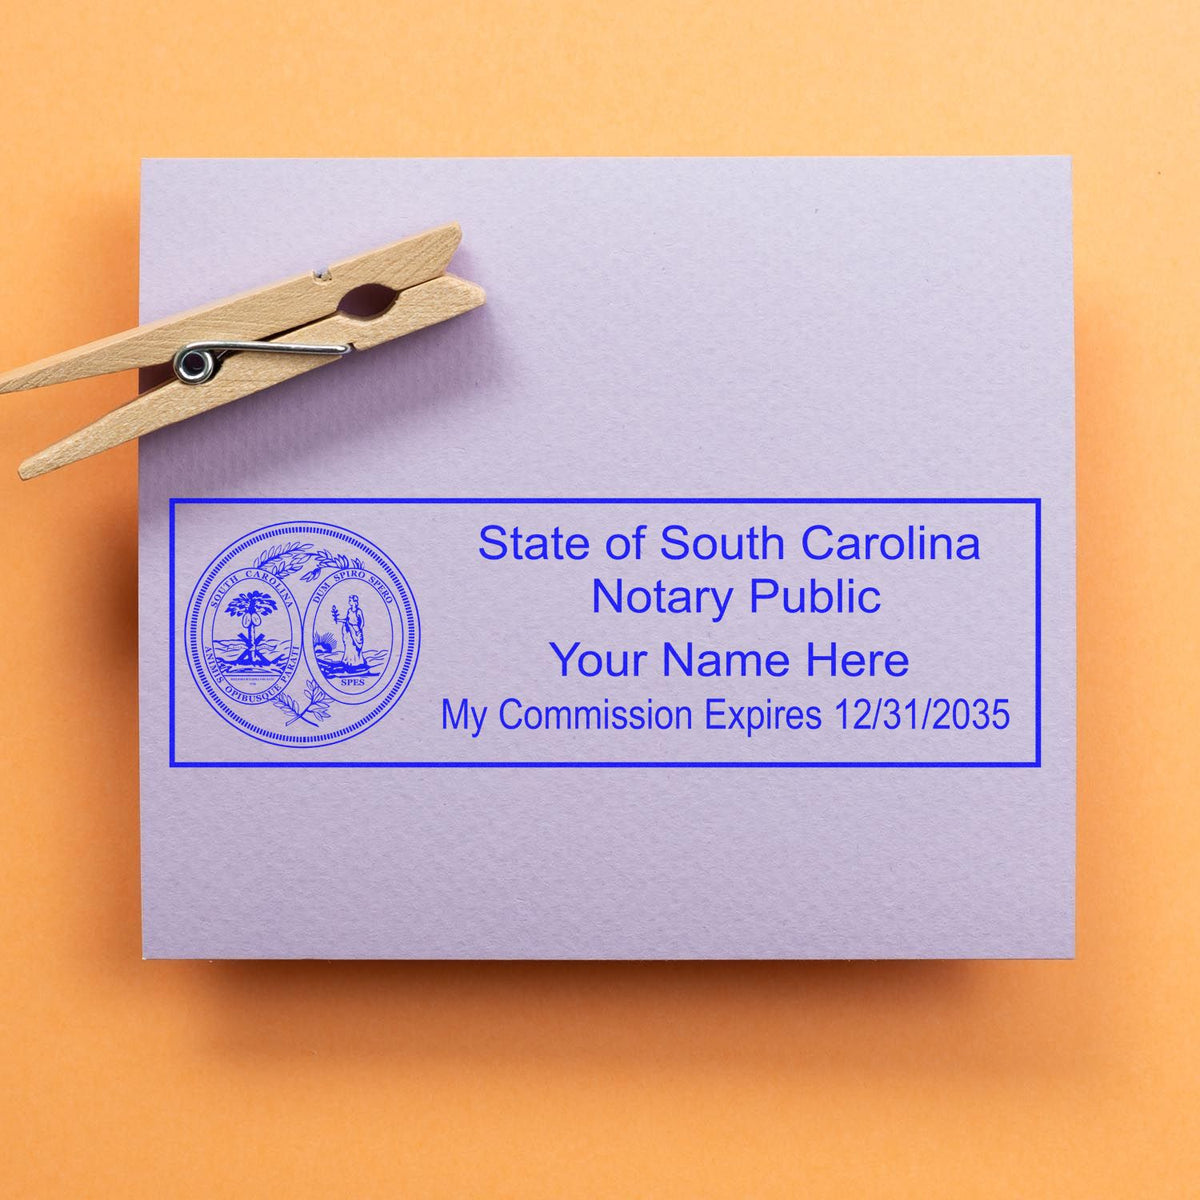 This paper is stamped with a sample imprint of the Wooden Handle South Carolina State Seal Notary Public Stamp, signifying its quality and reliability.